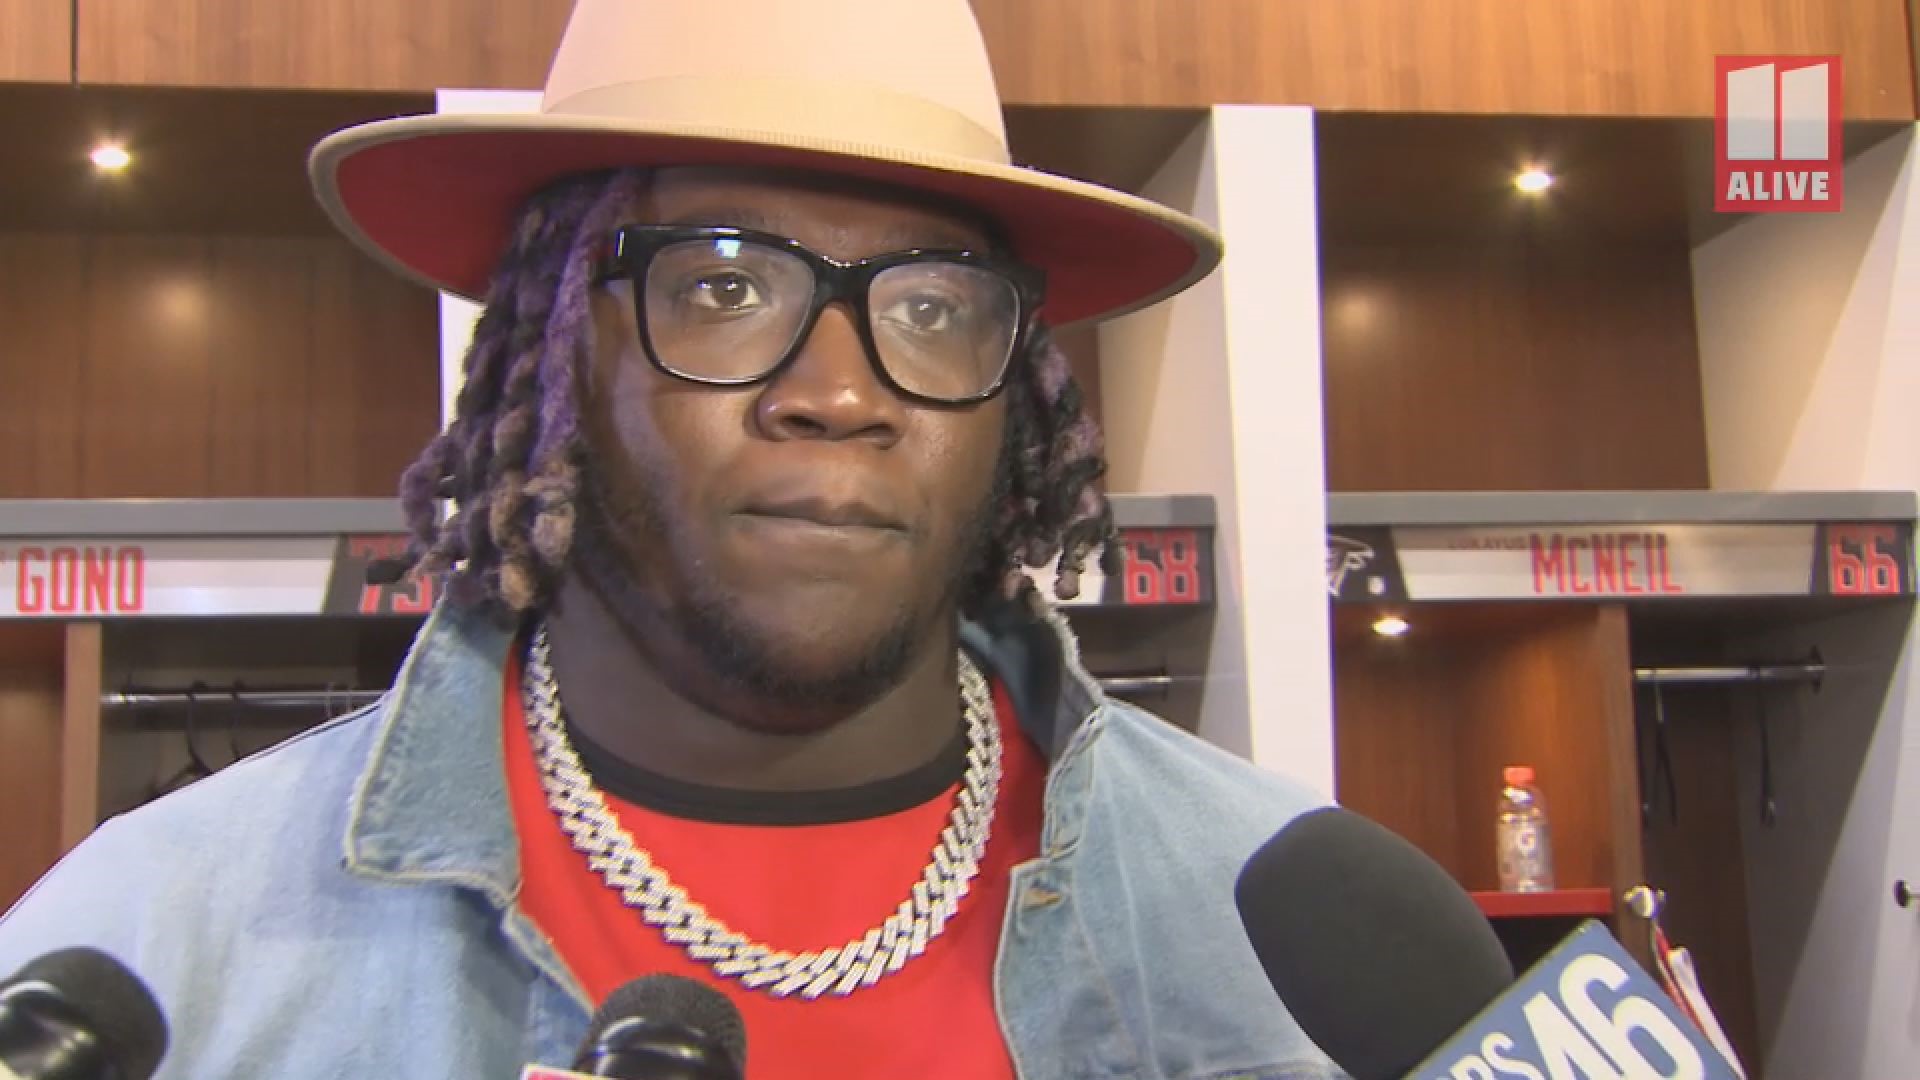 The Falcons' guard spoke to 11Alive Sports in the locker room after the team's loss to Tampa Bay, Sunday.